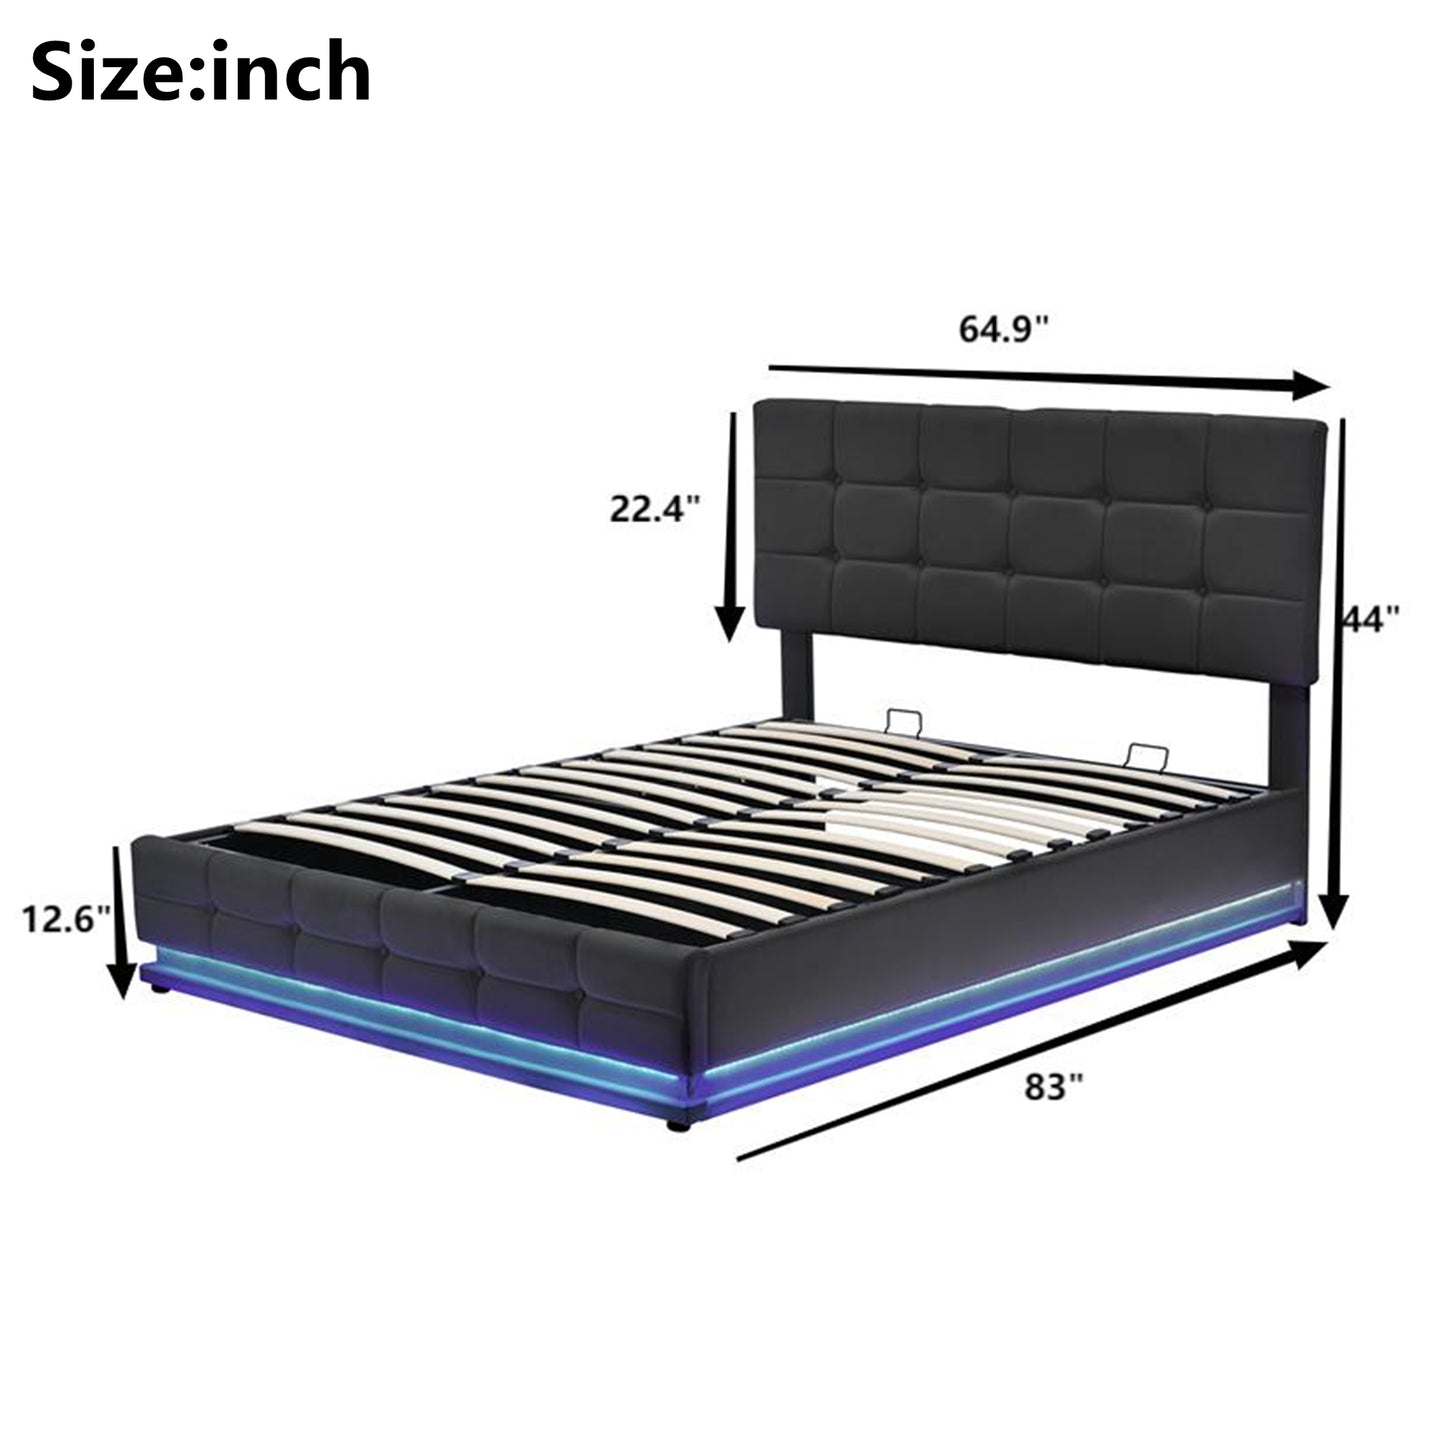 Luxury Dream Queen Bed with Smart Storage and LED Illumination - Black